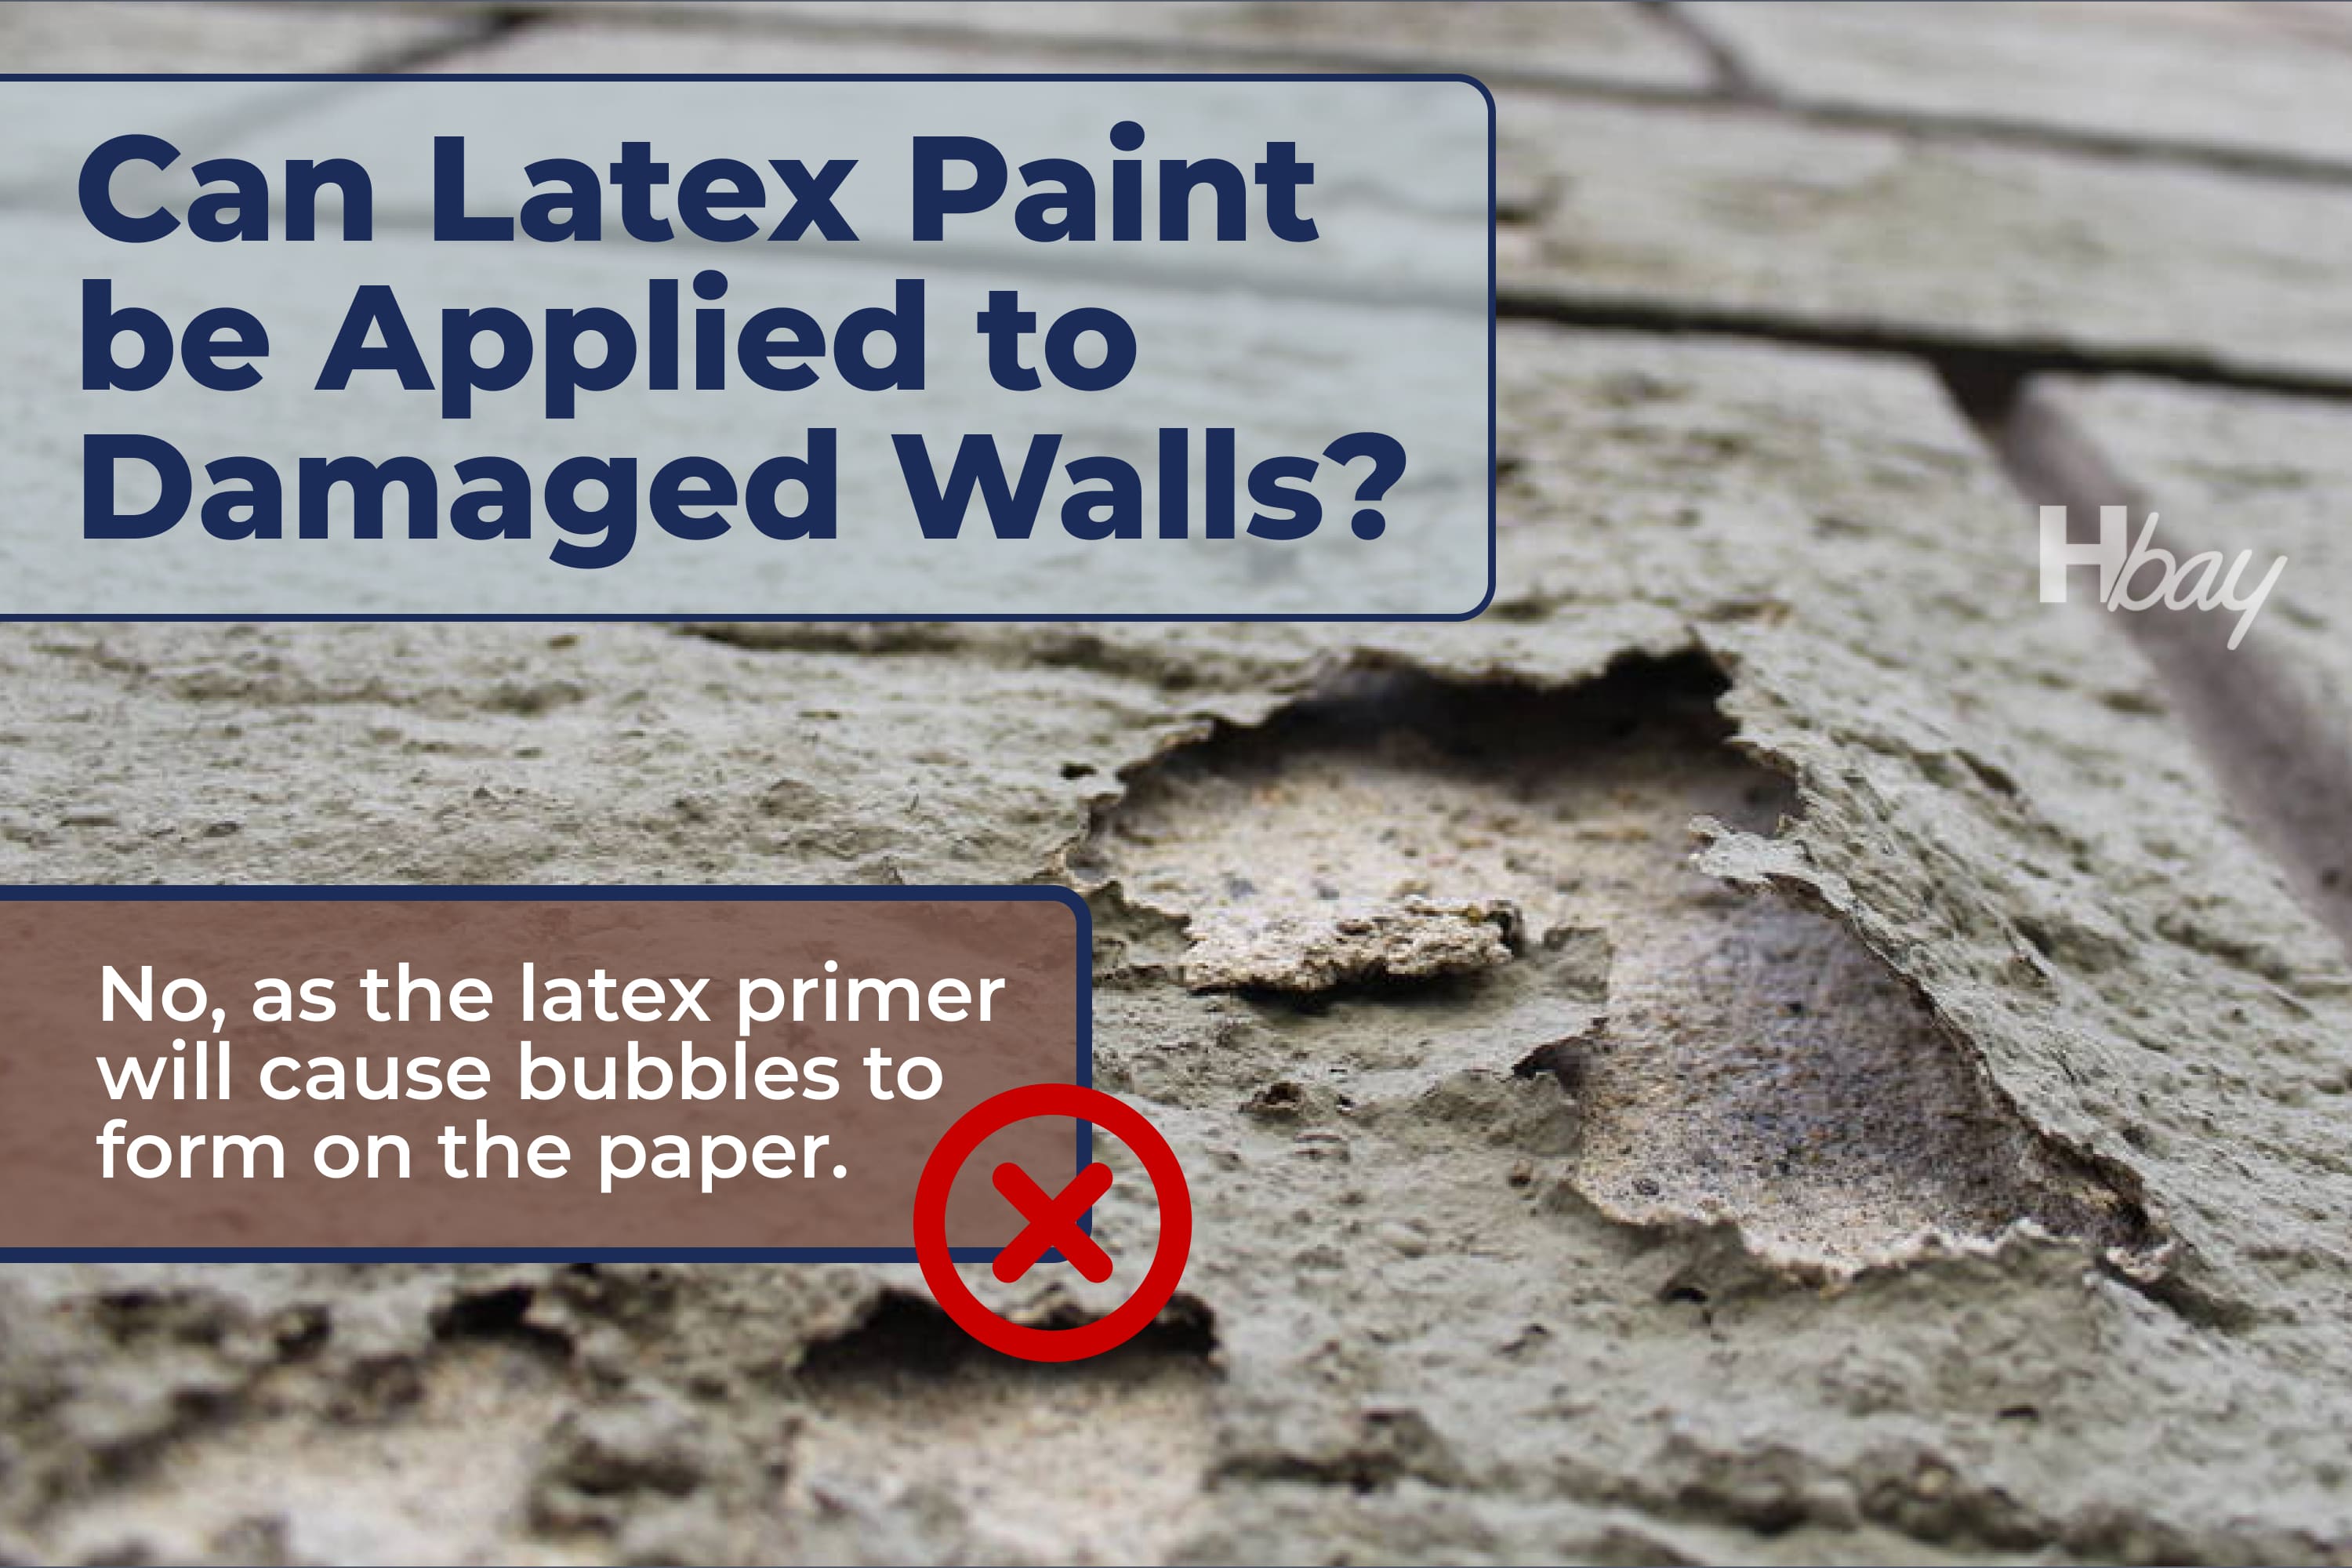 Can latex paint be applied to damaged walls